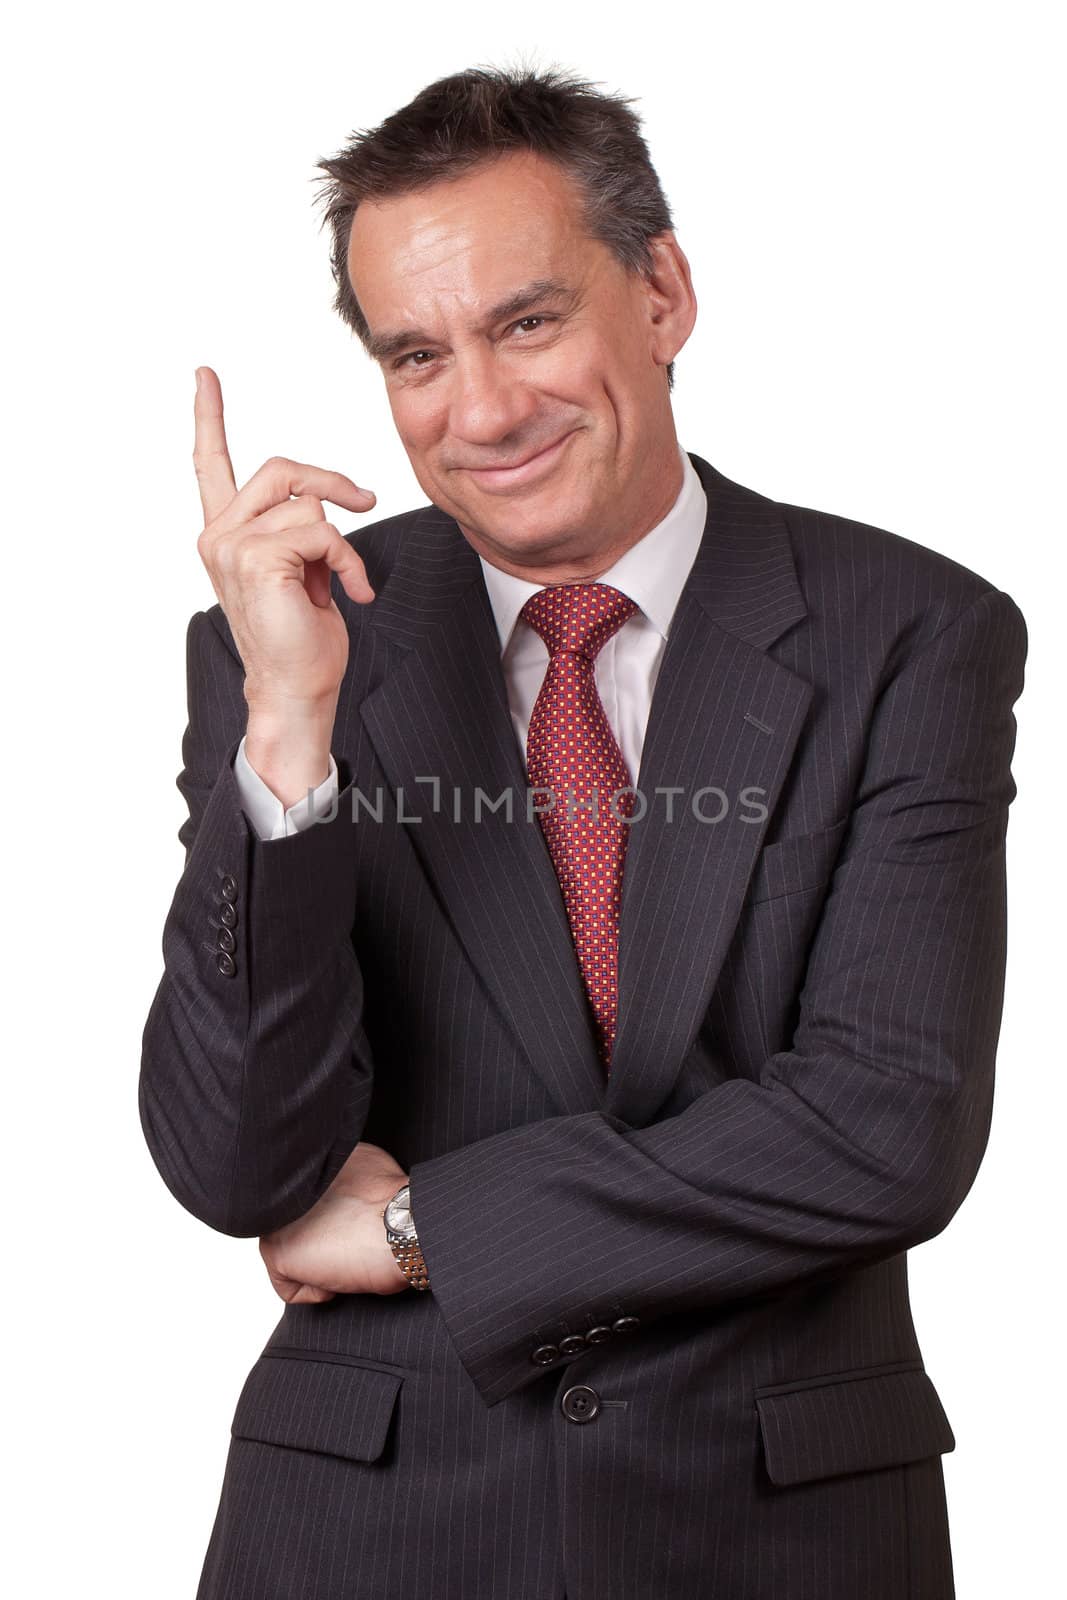 Attractive Smiling Middle Age Business Man in Suit Pointing Upwards Isolated